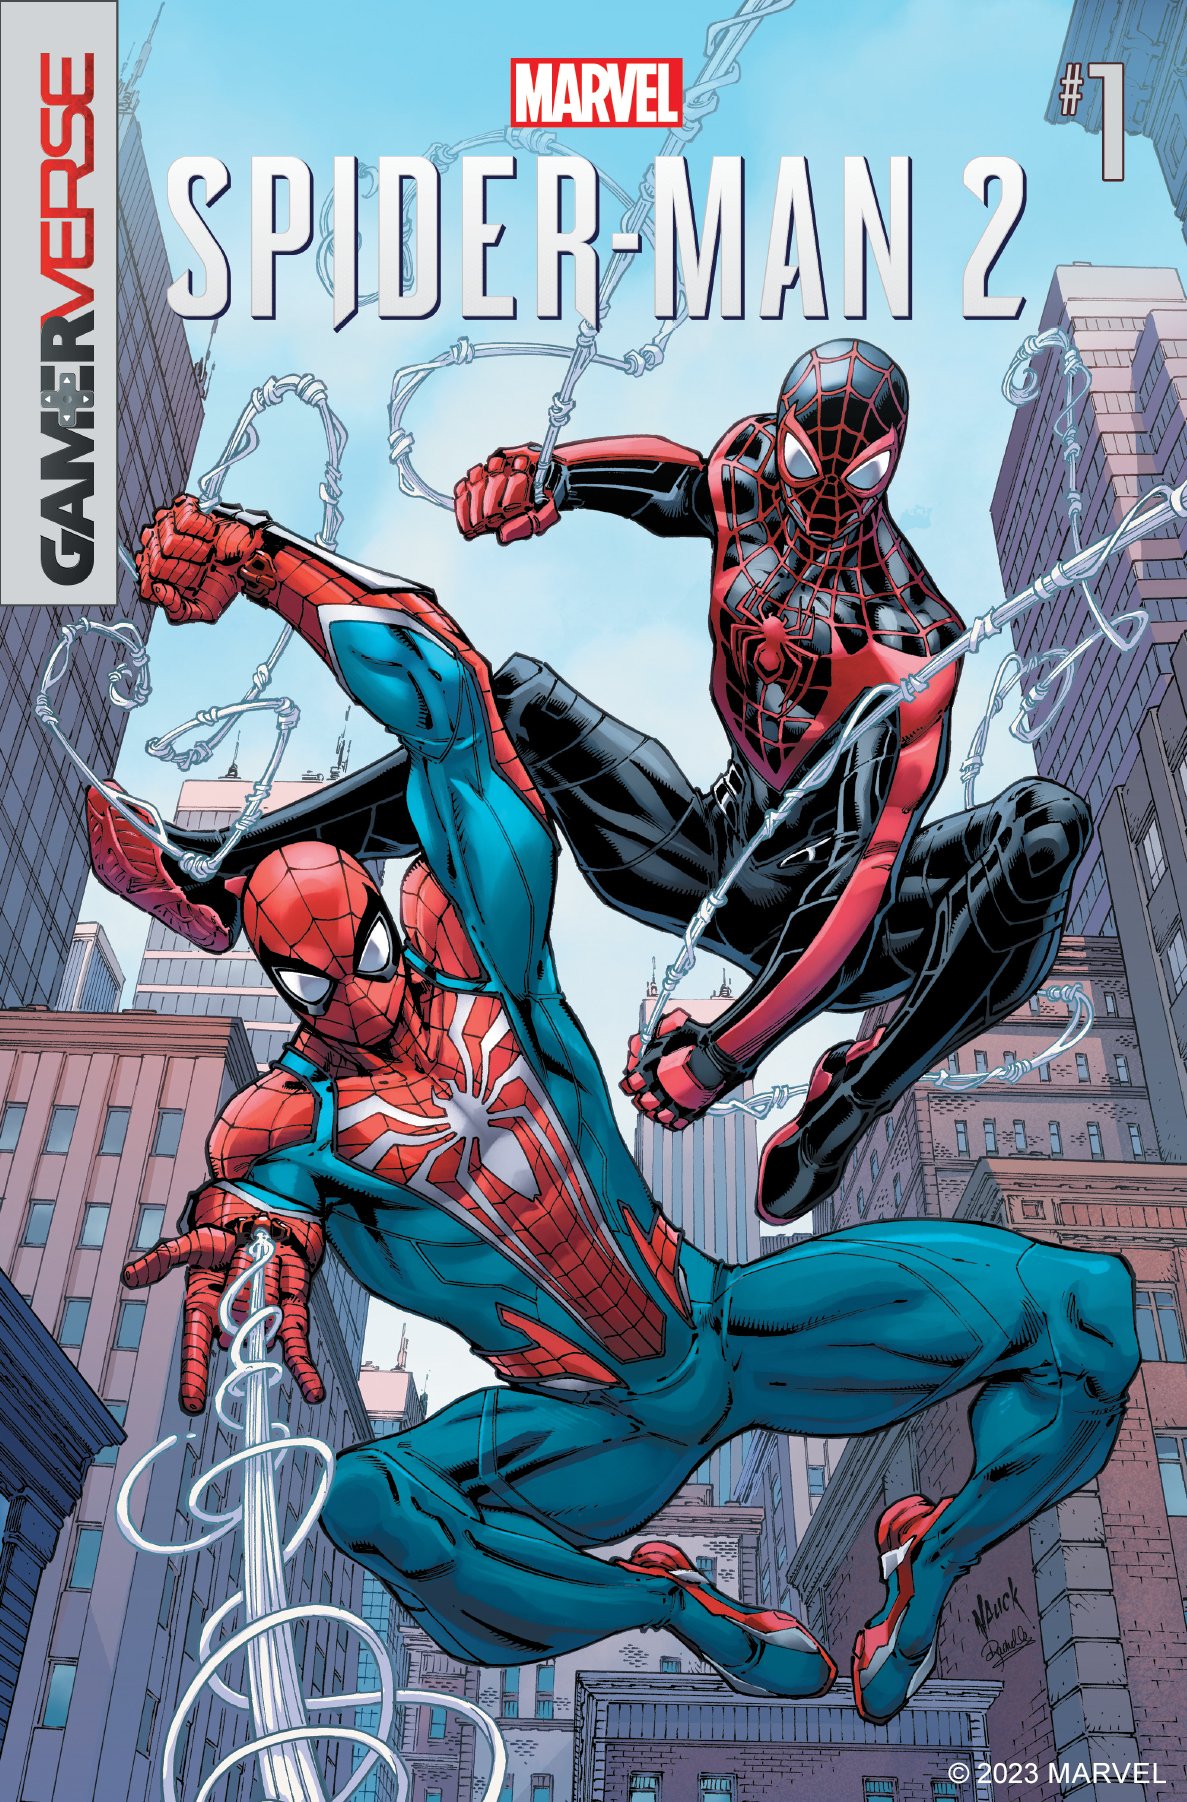 Marvel’s SpiderMan 2 Comic Appearing on Free Comic Book Day